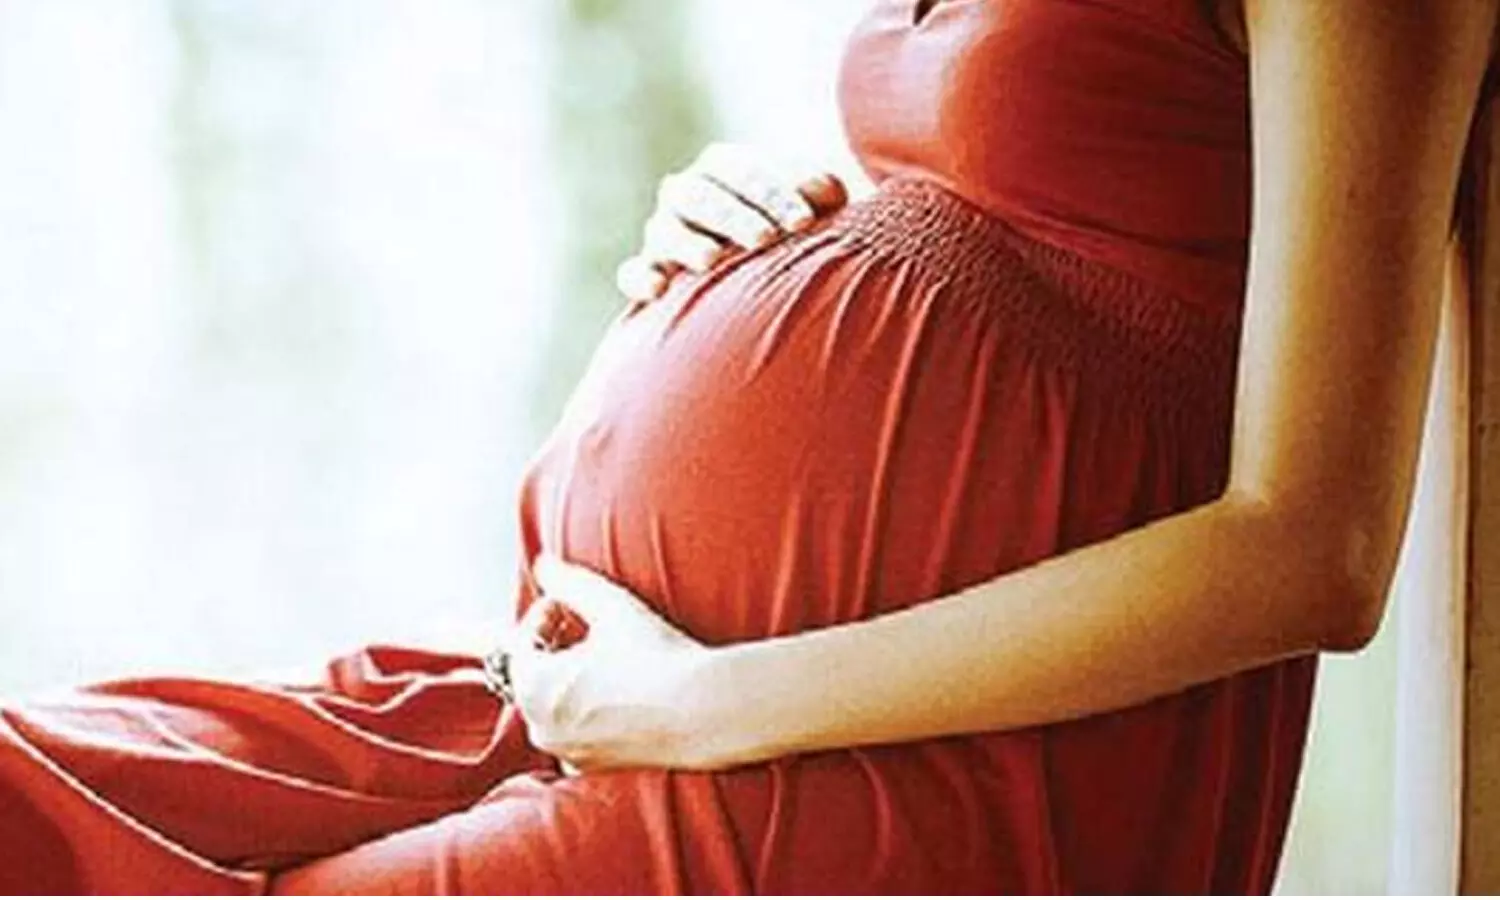 know about bleeding-and-spotting during pregnancy